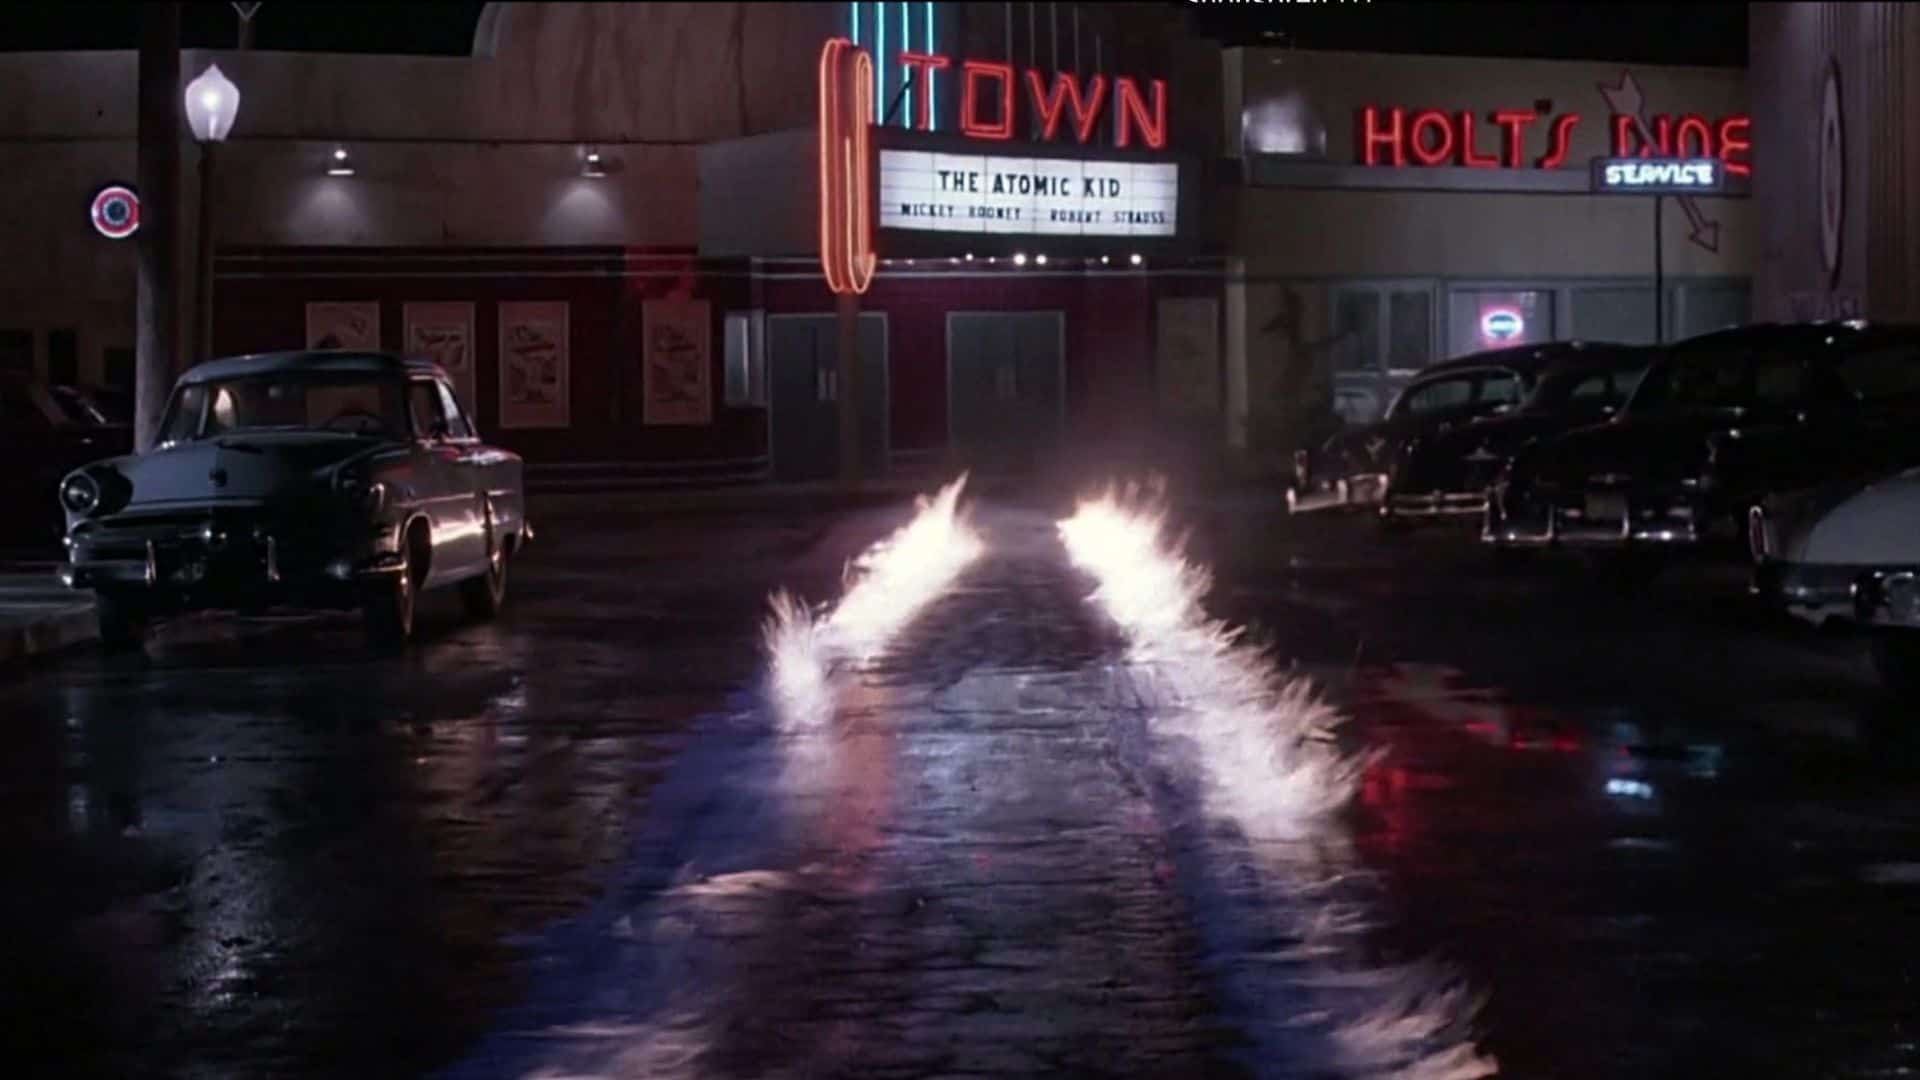 DeLorean tire marks on fire in front of a midcentury theater in this image from Amblin Pictures.